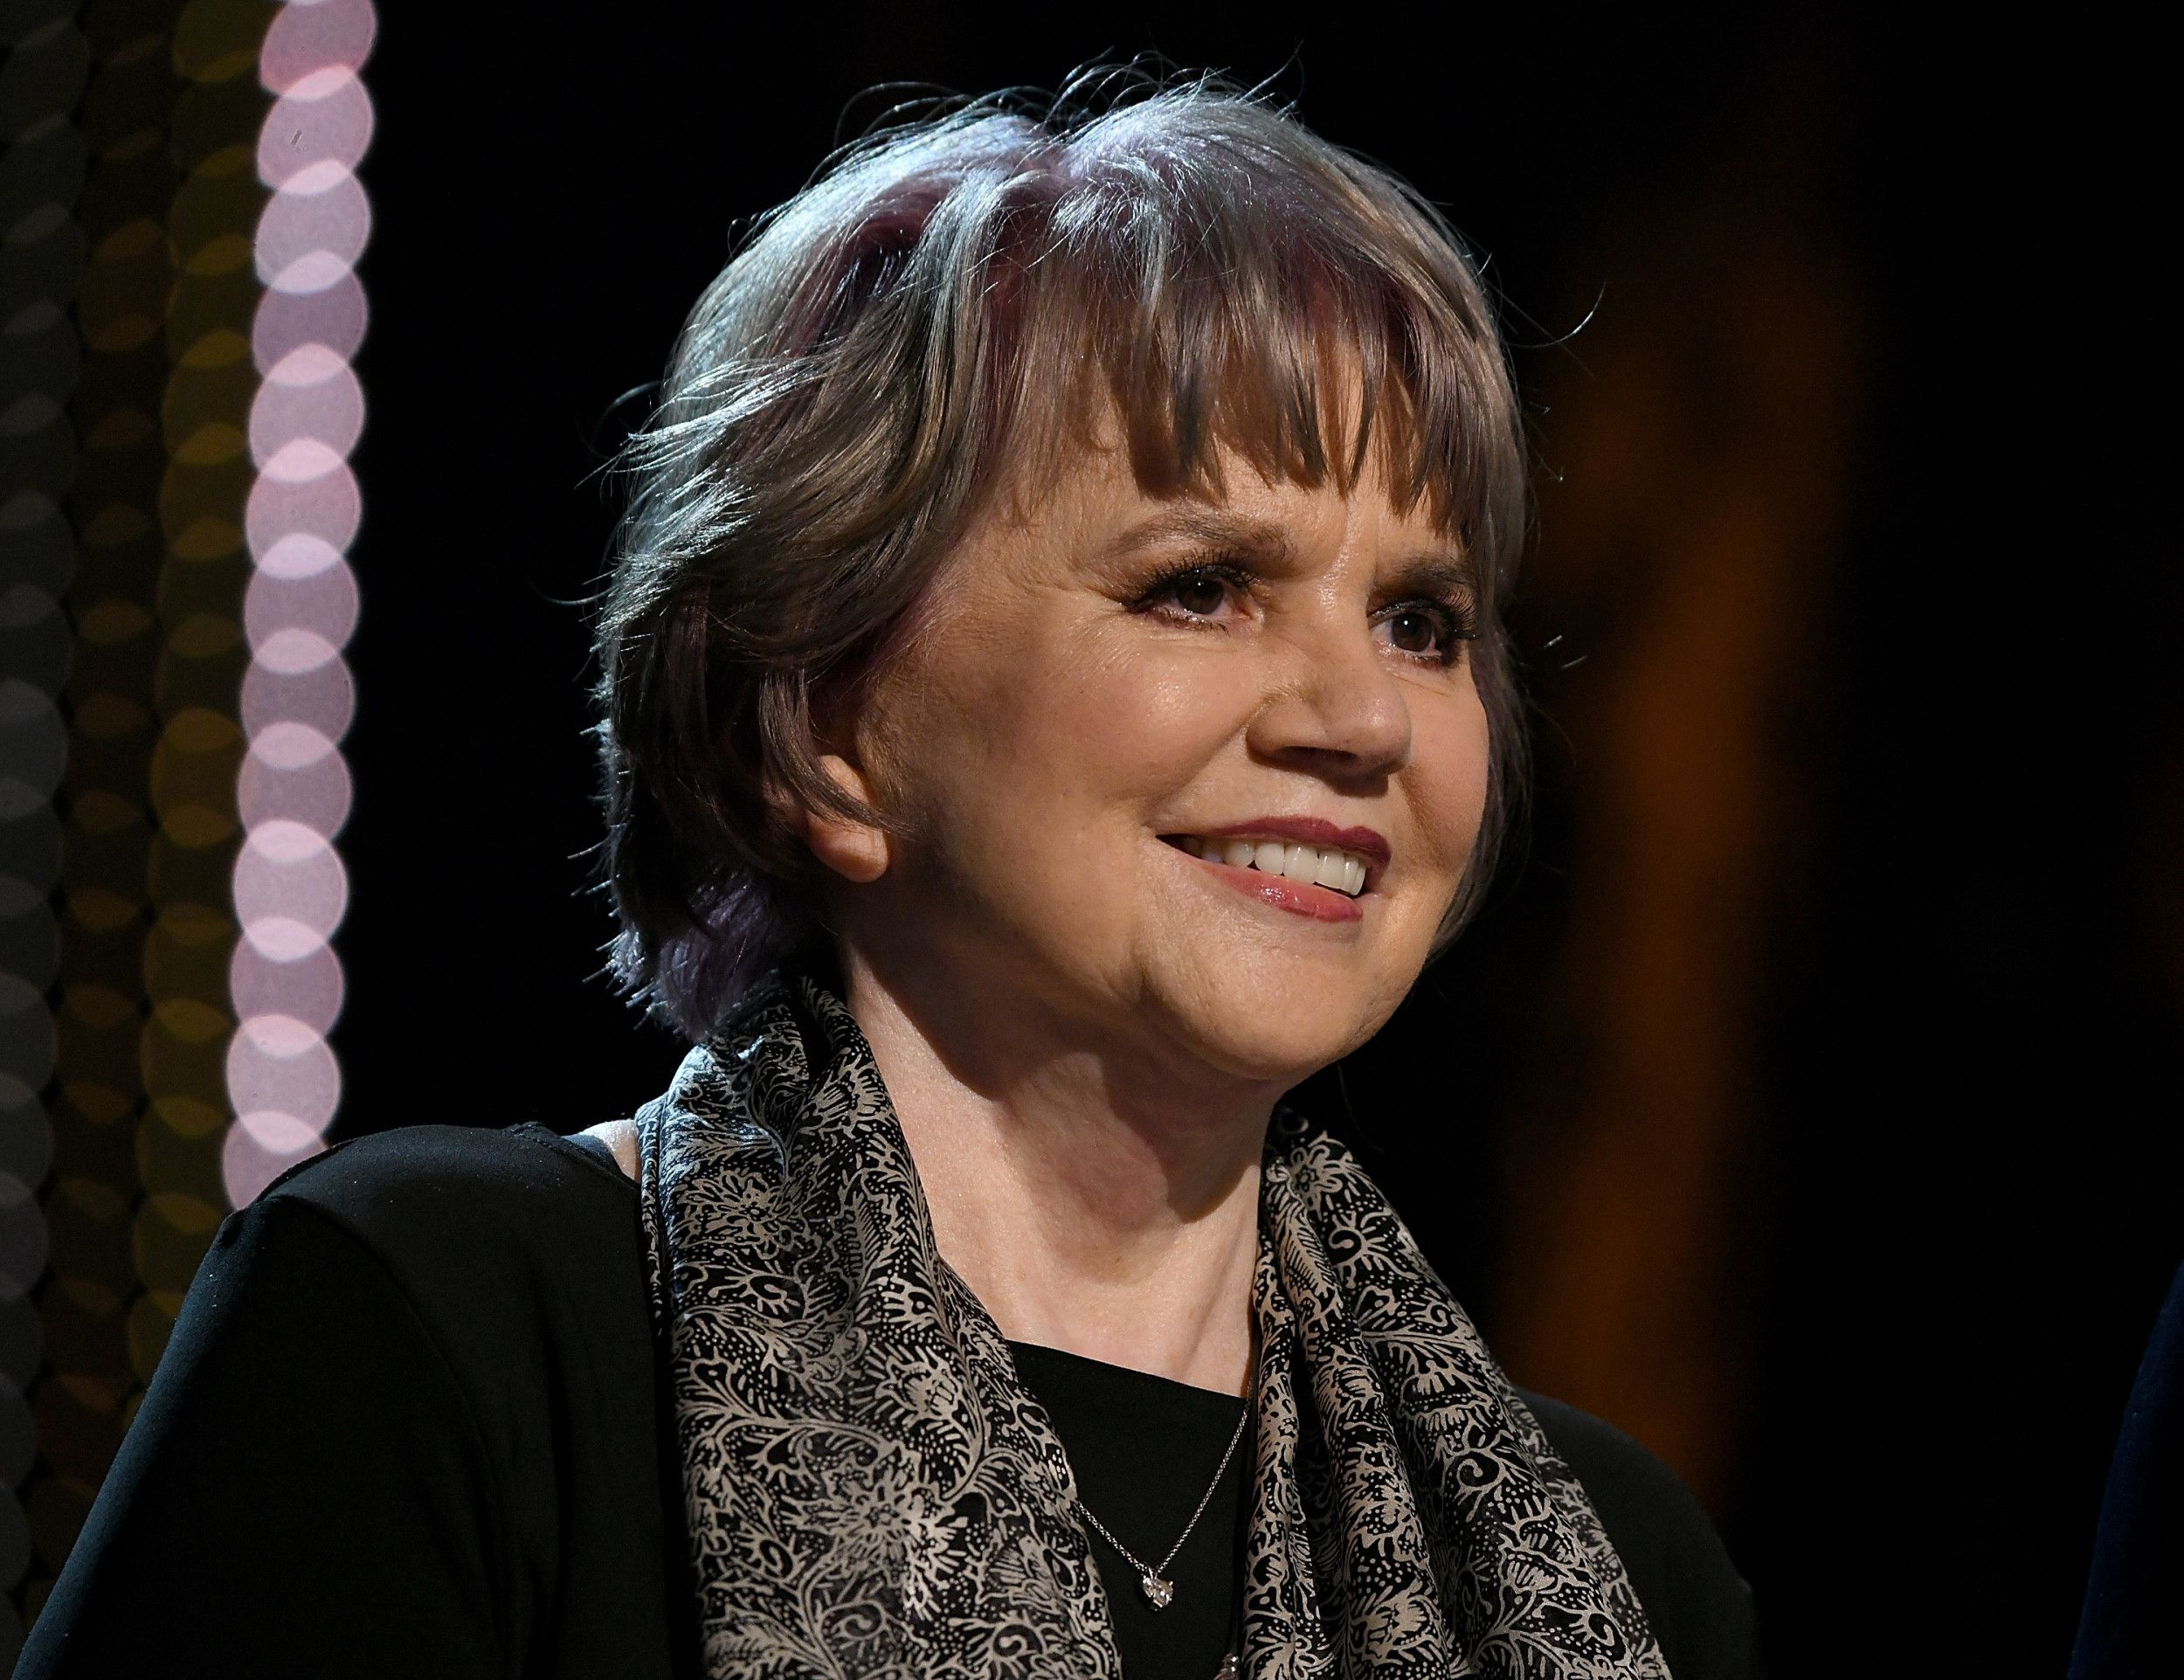 Linda Ronstadt Compares Donald Trump to Adolf Hitler, Says 'If You Read the History, You Won't Be Surprised'